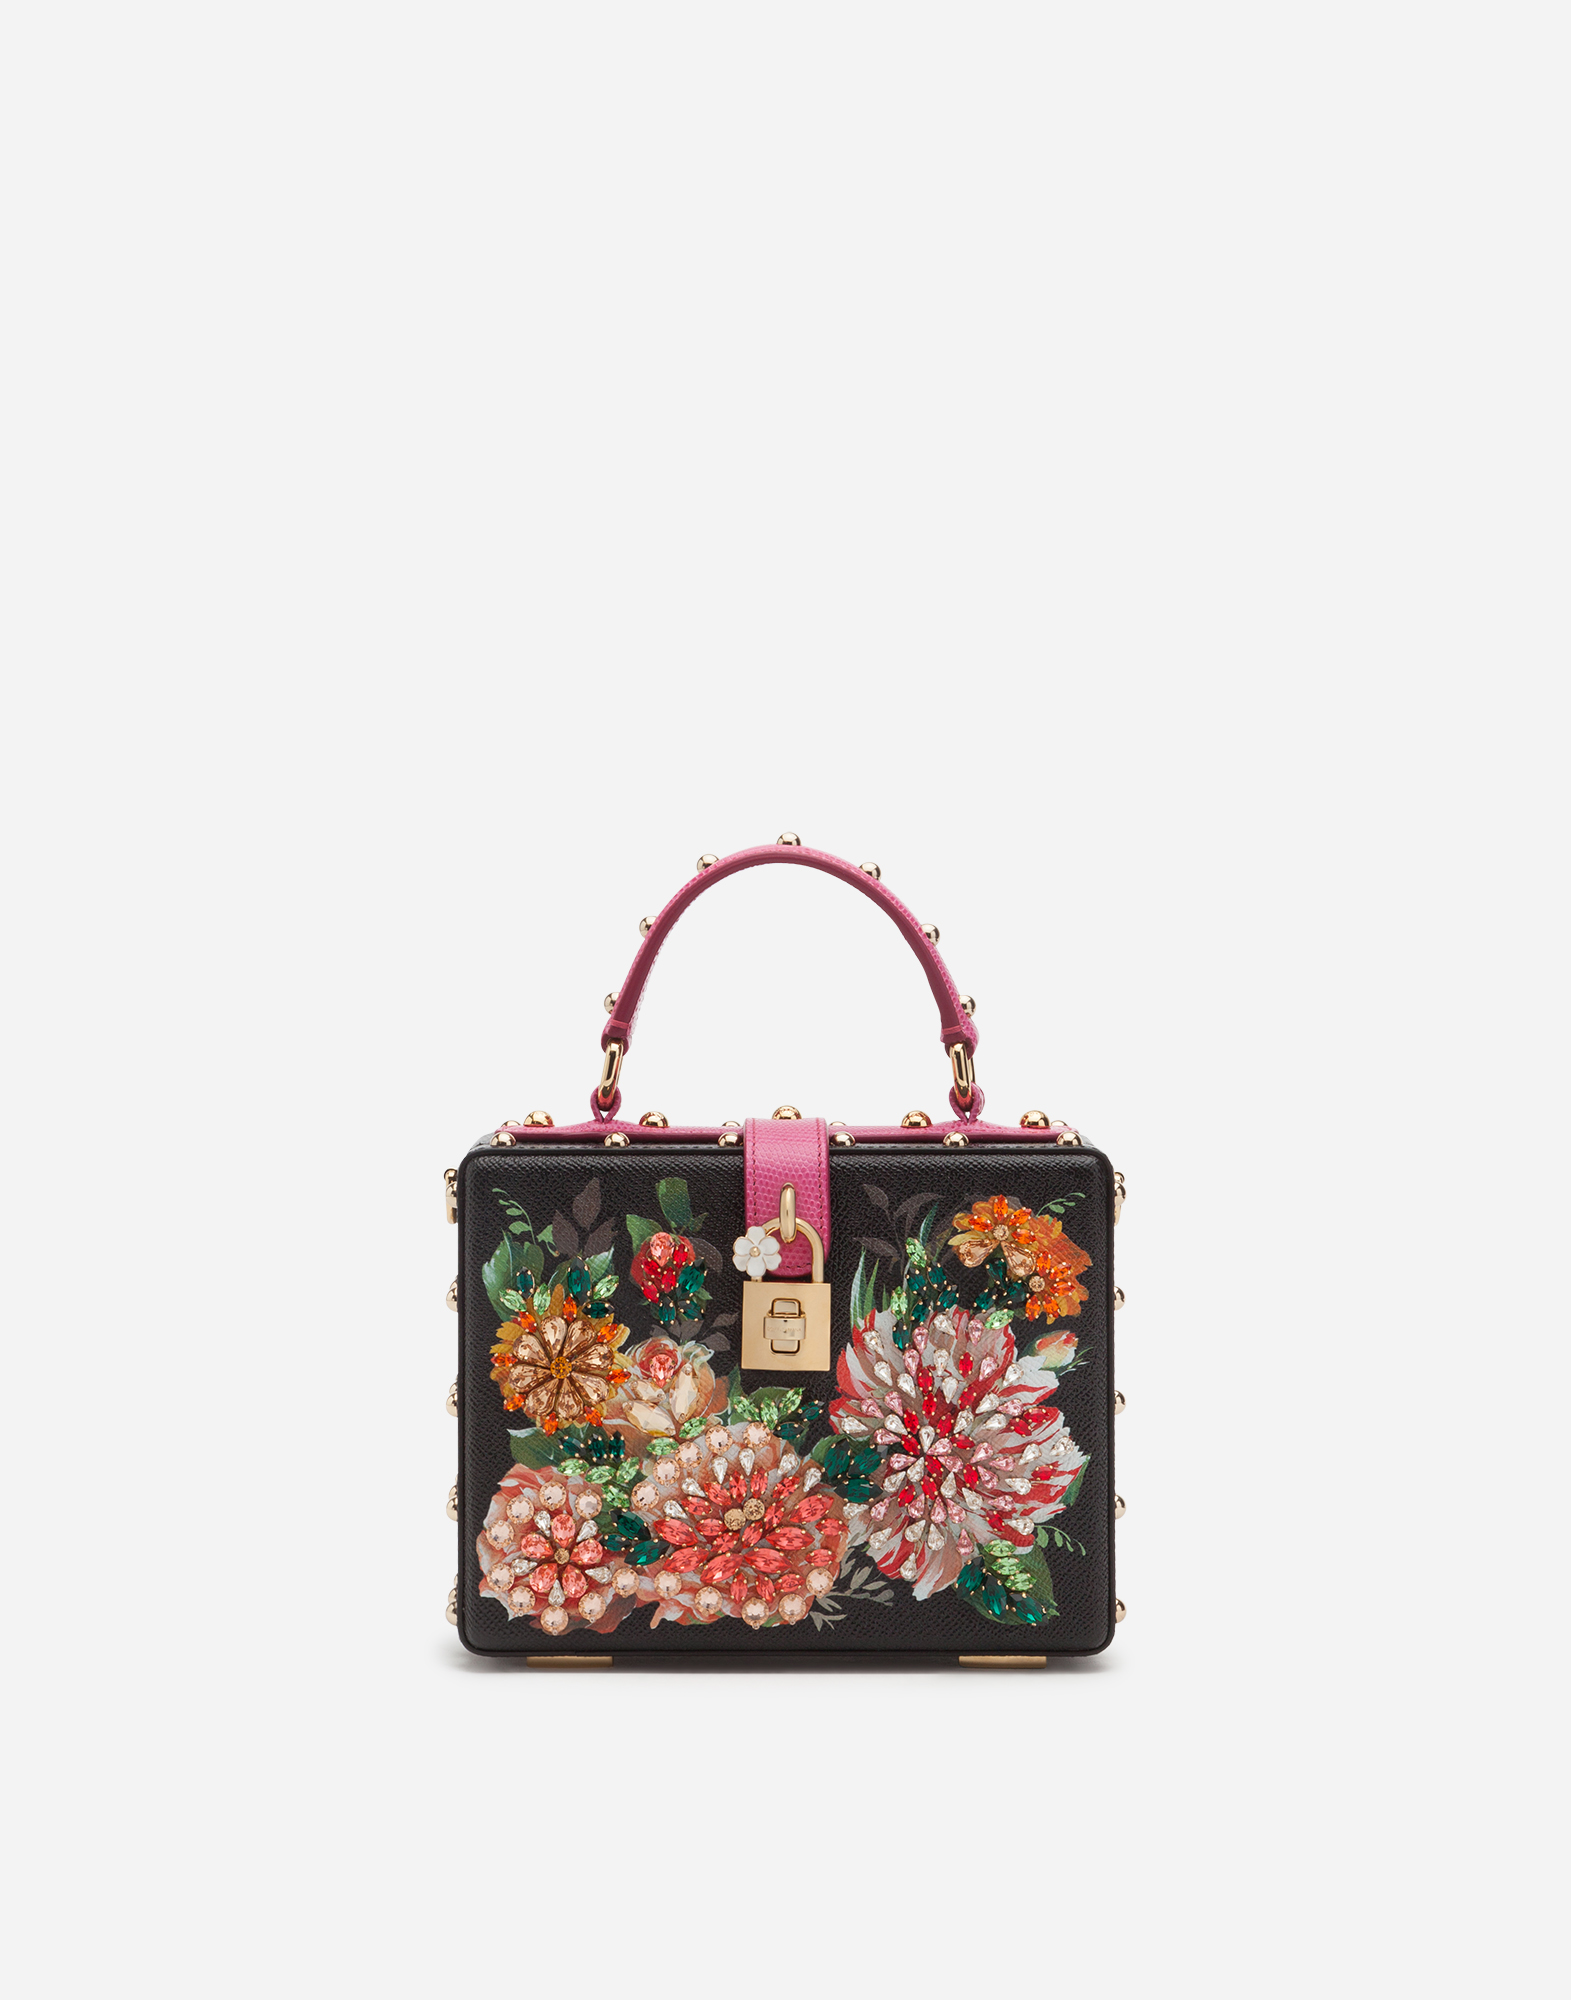 DOLCE & GABBANA DOLCE BOX BAG IN PRINTED DAUPHINE CALFSKIN WITH EMBROIDERY